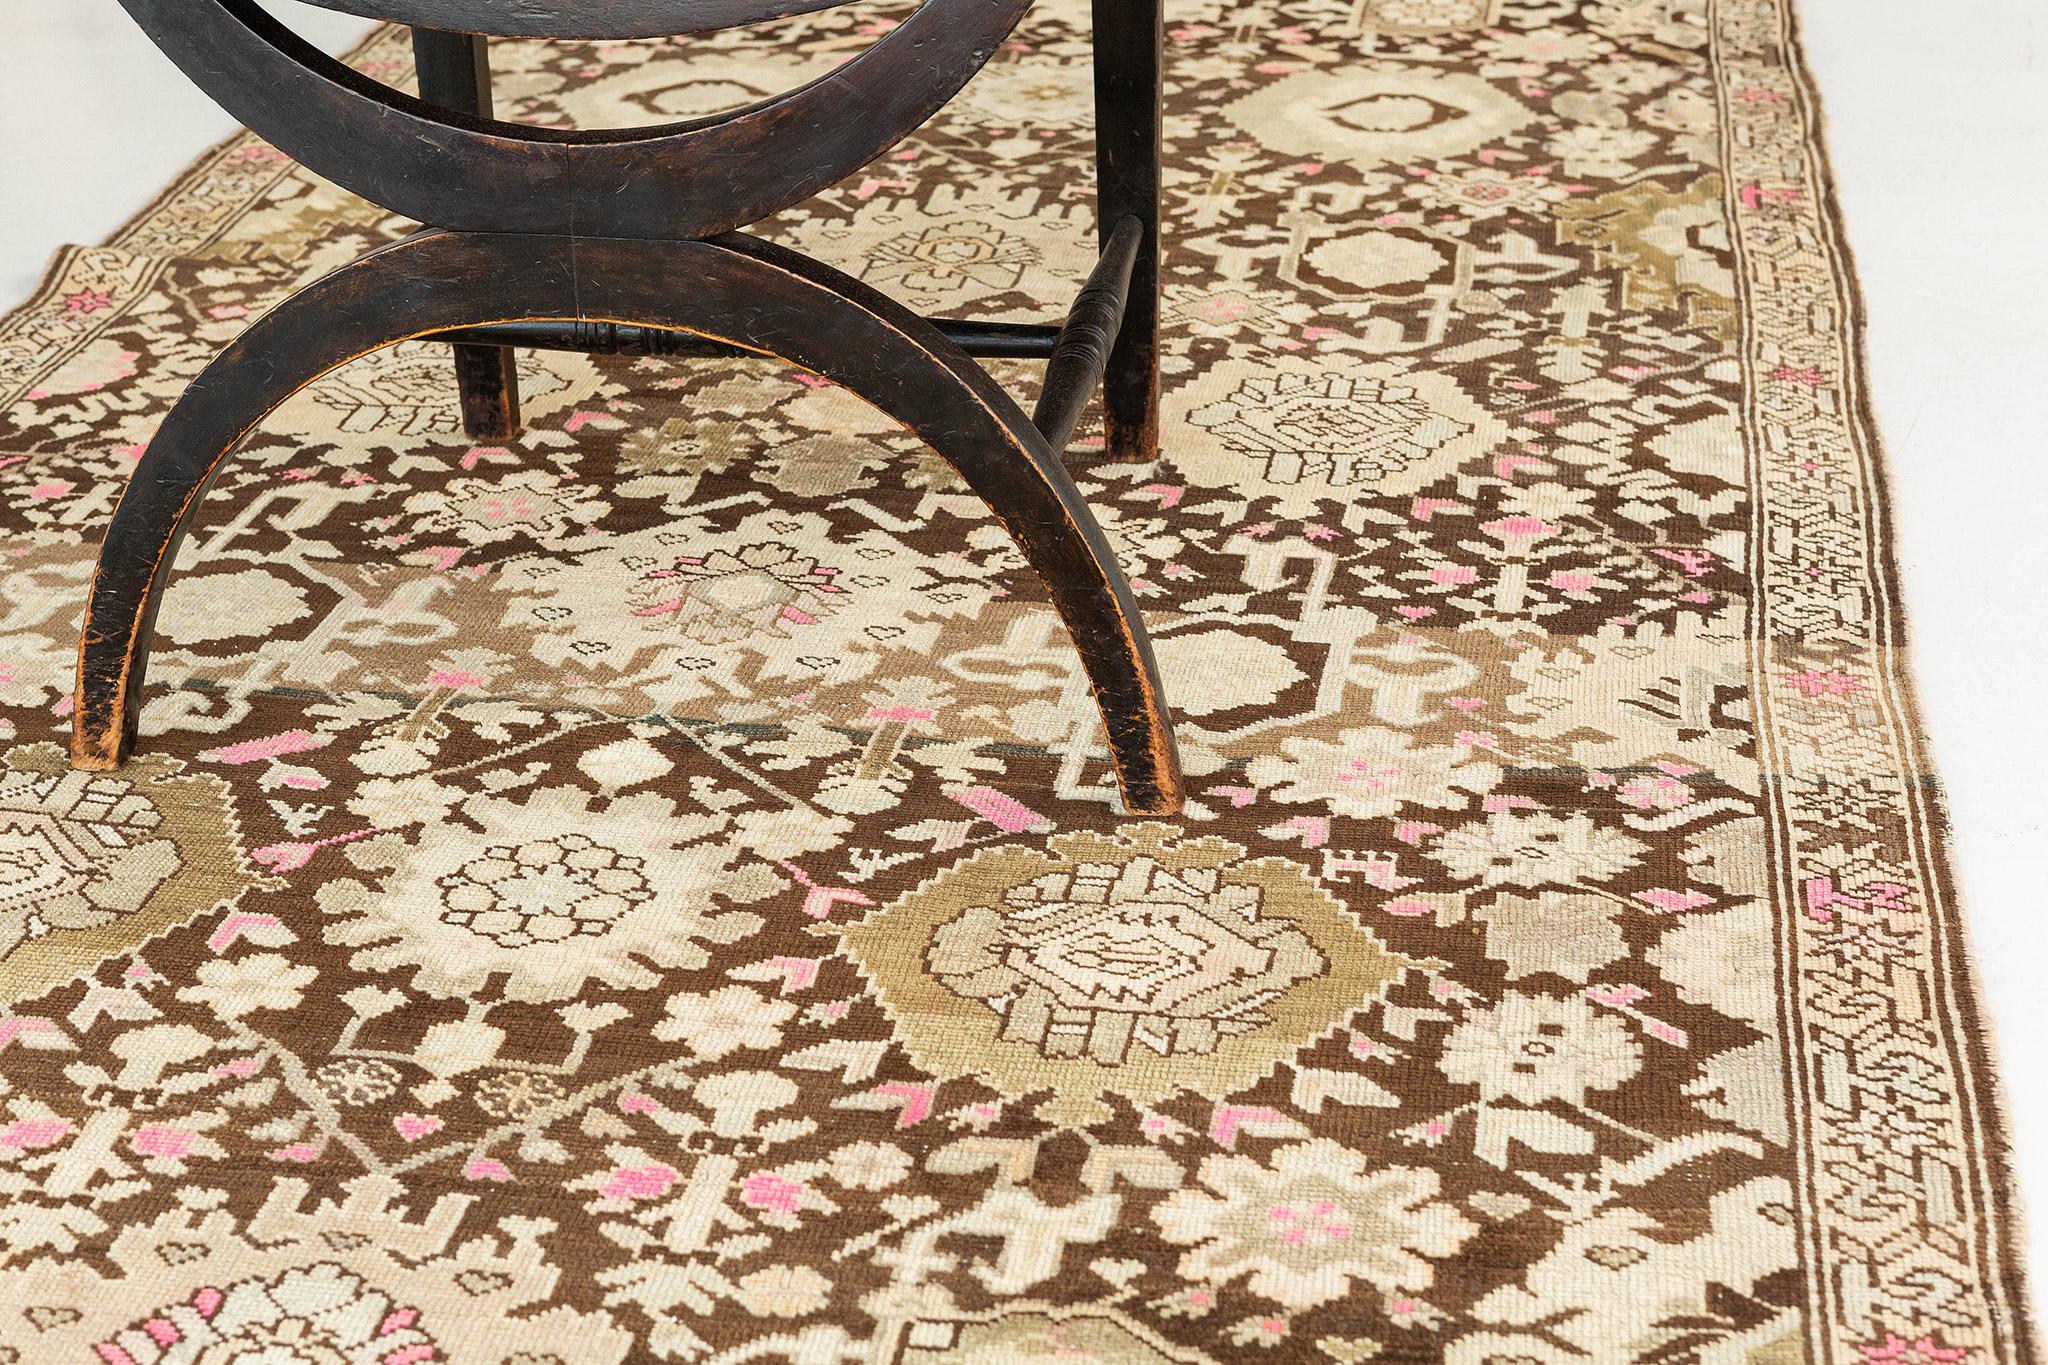 The attention to detail and fascinating Persian motifs on this Gharabagh runner allow for continual discovery. Beautiful over wood, concrete, and marble floors, this antique Persian is impervious to trends, and will last for generations to come.